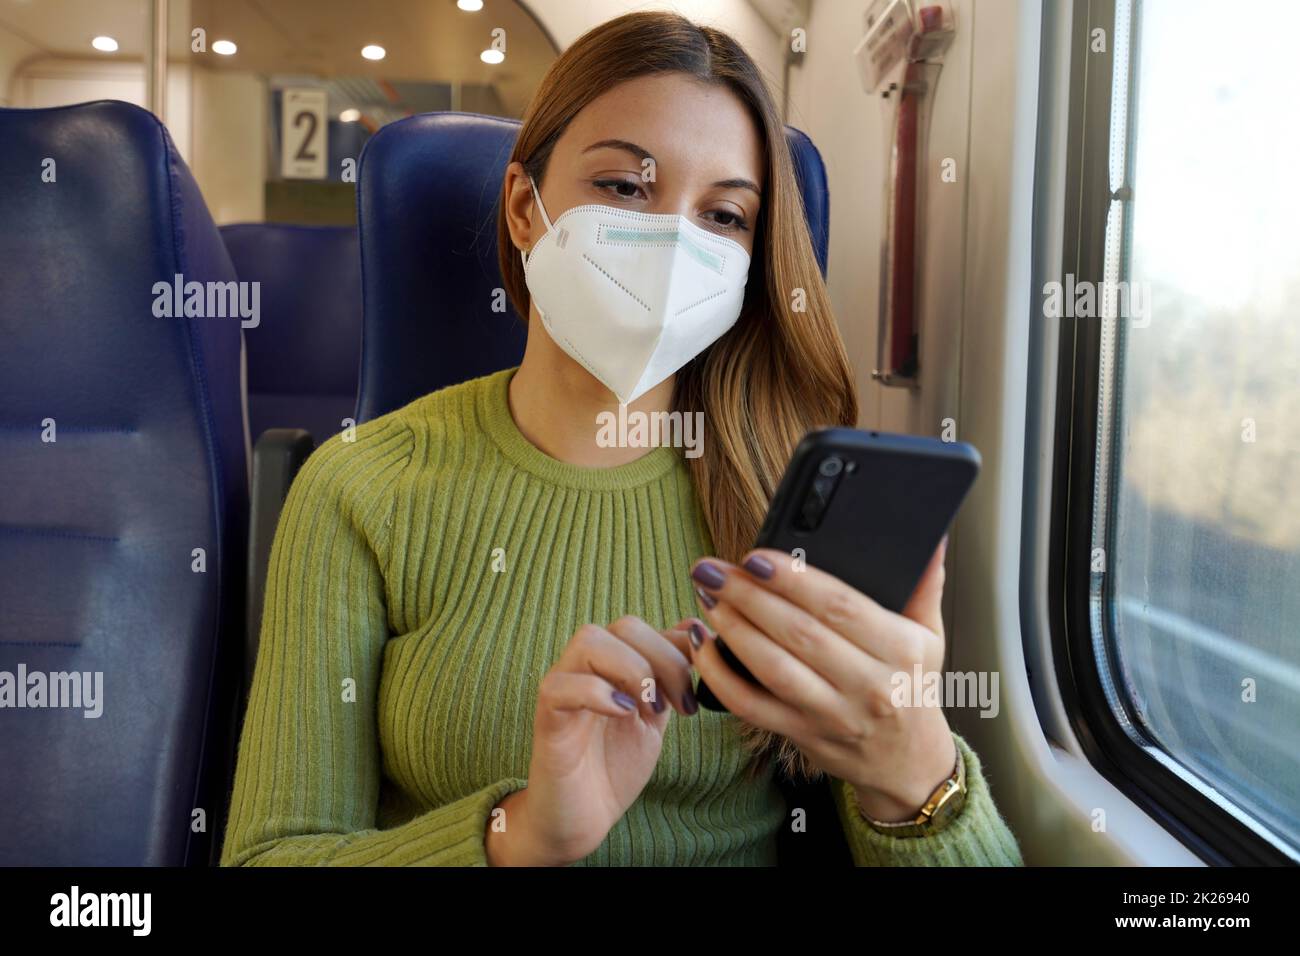 Relaxed woman on train wearing medical face mask using smart phone app. Commuter with protective mask traveling sitting in business class texting on mobile phone. Travel safely on public transport. Stock Photo